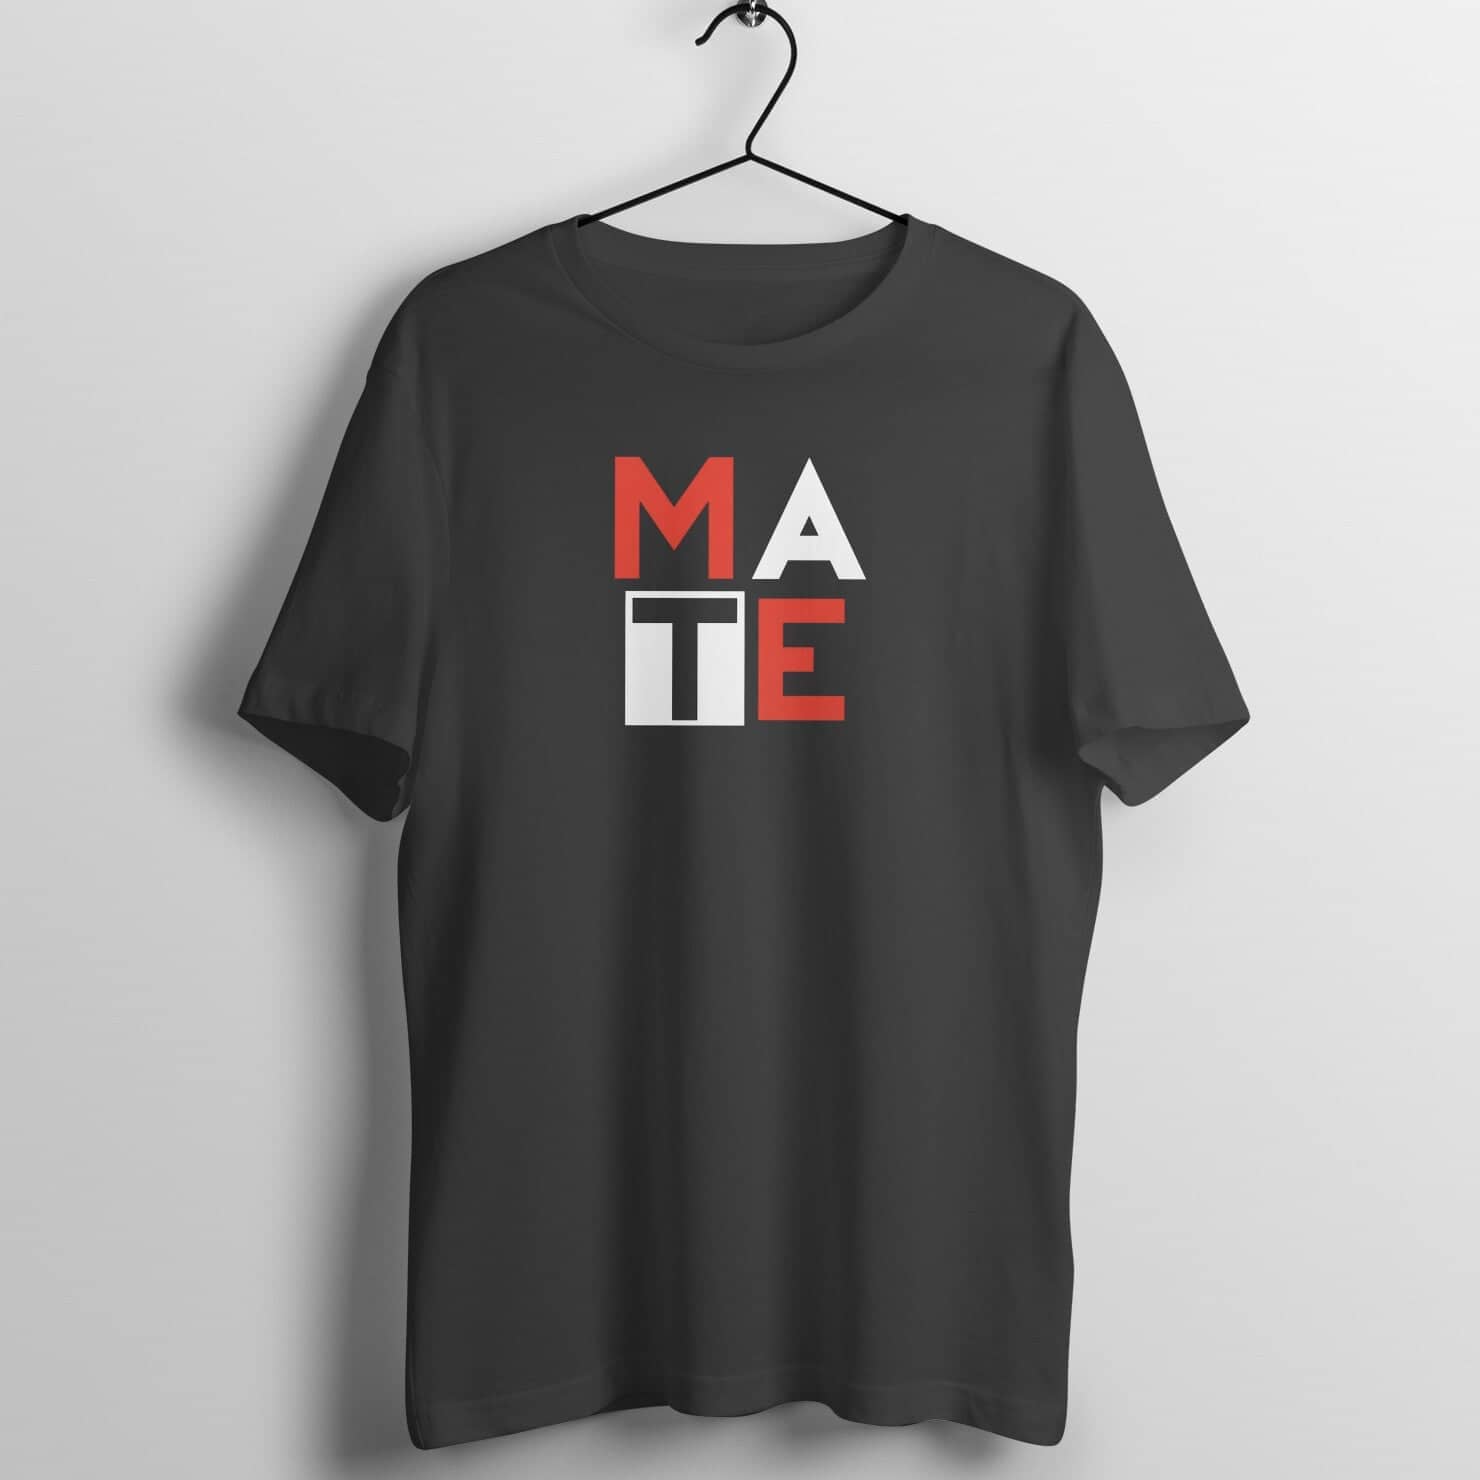 Mate Soulmate Special Matching Couples T Shirt for Men and Women freeshipping - Catch My Drift India